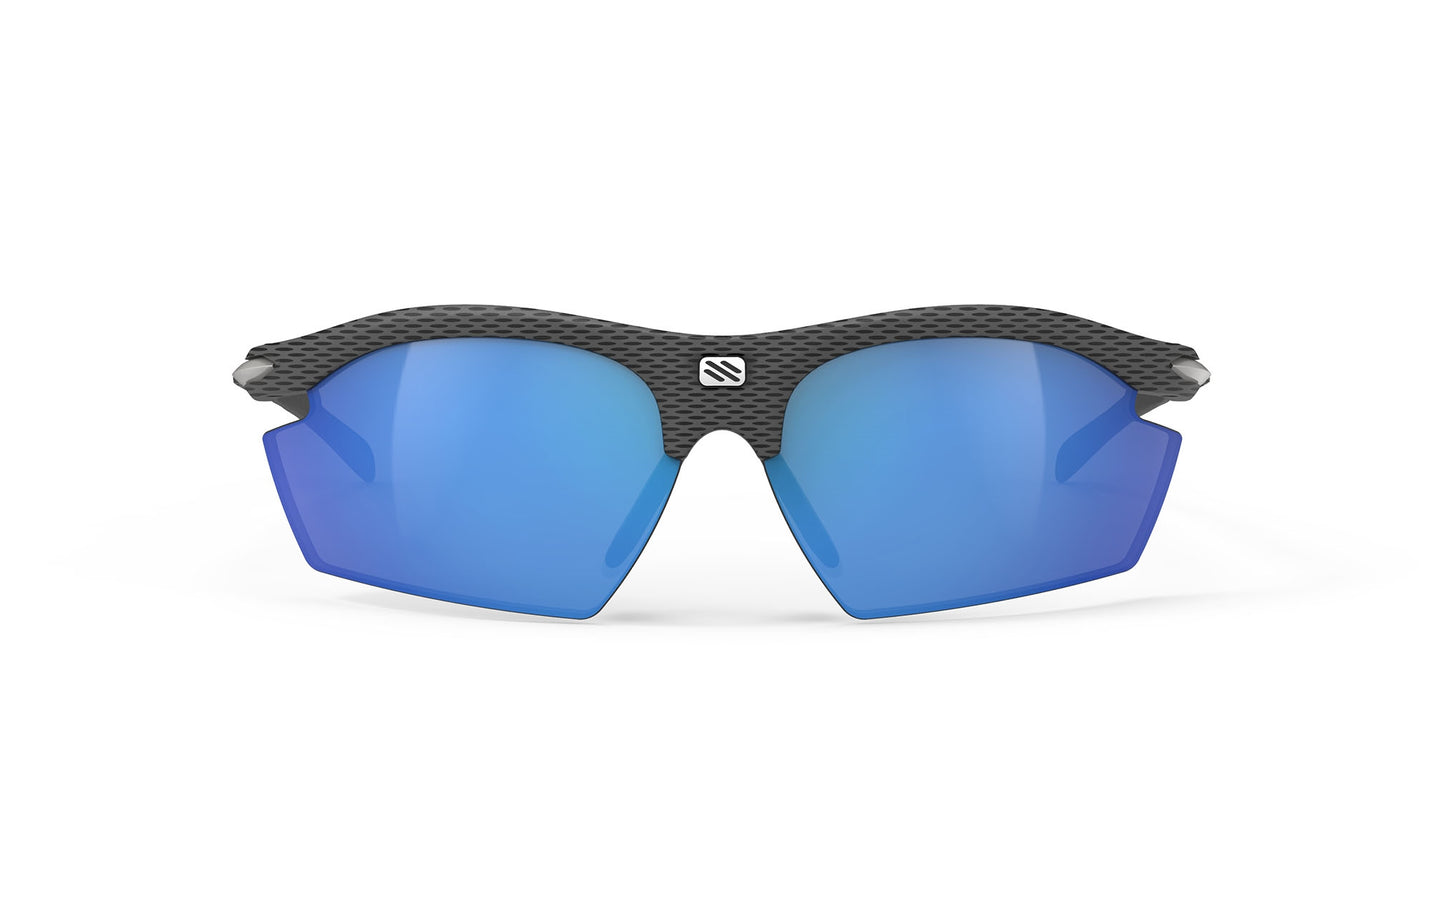 Load image into Gallery viewer, Rudy Project Rydon Carbon - Polar 3Fx Hdr Multilaser Blue Sunglasses
